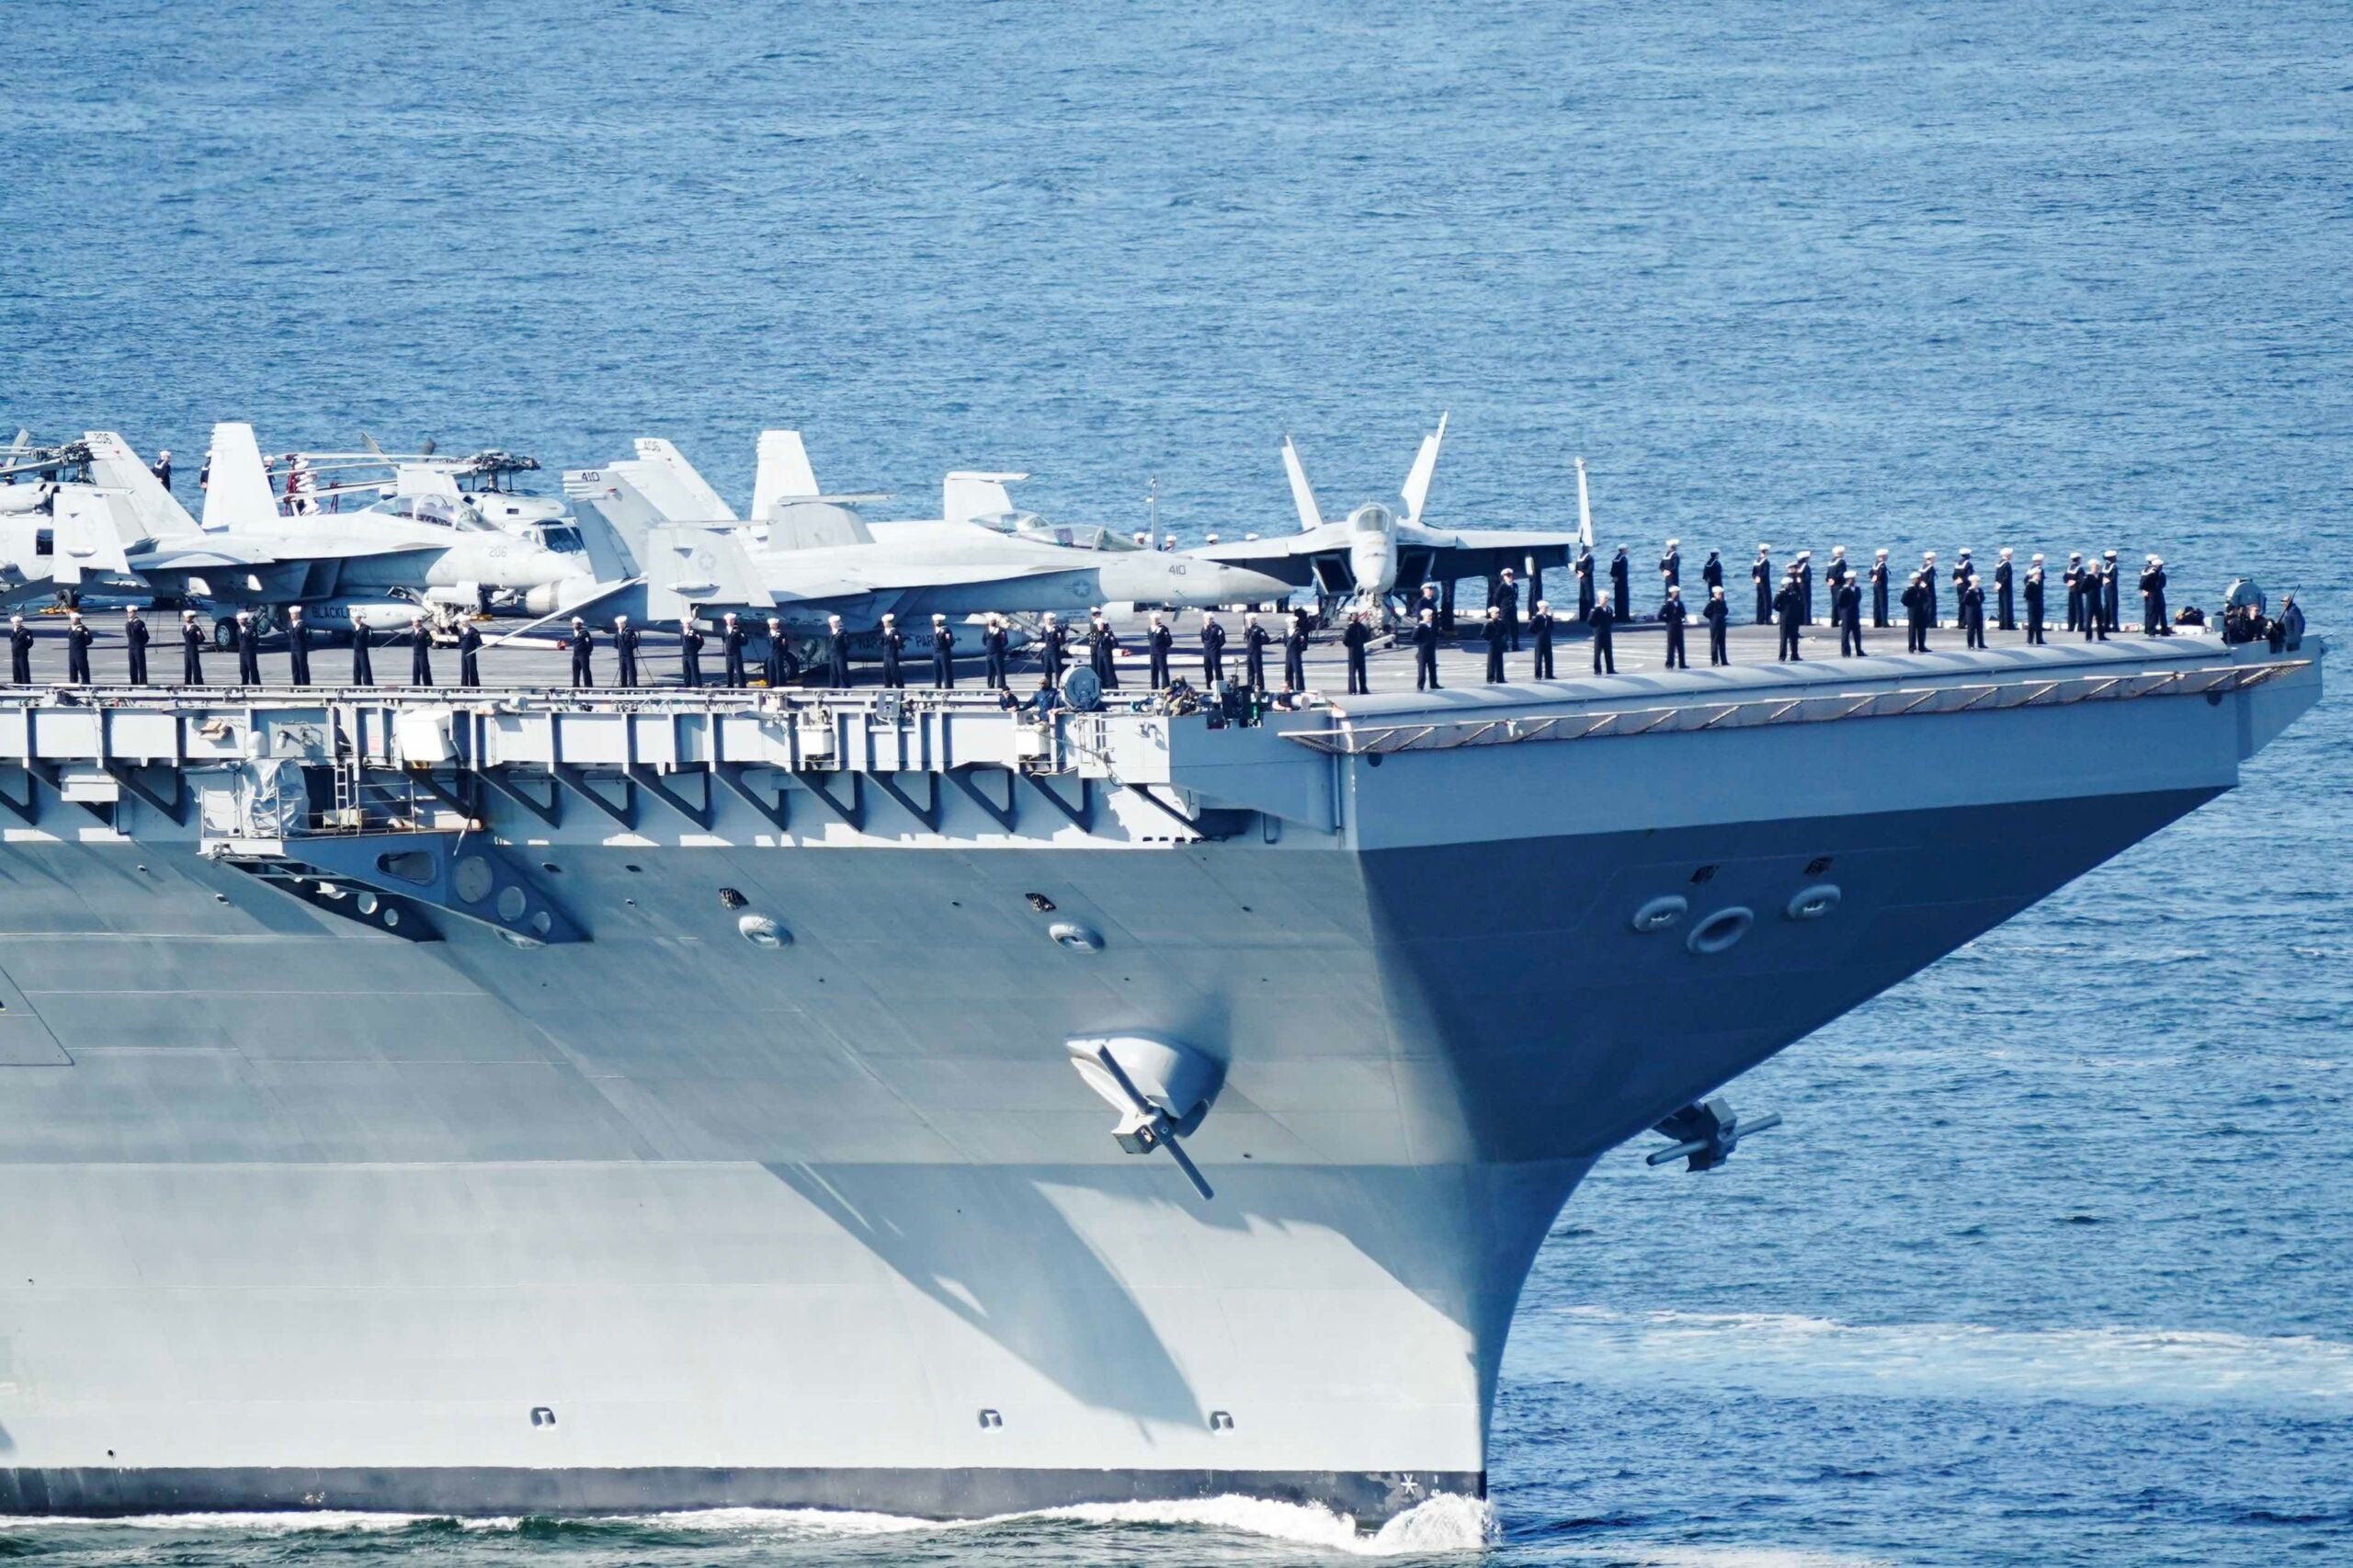 This photograph taken on May 24, 2023 shows the US aircraft carrier USS Gerald R. Ford cruising near Jeloya island, in Moss, south of Oslo. The ship is the world's largest warship and will be in port in Oslo for four days. Russia's embassy in Norway on Tuesday, May 23, 2023 hashly criticised the visit by the US aircraft carrier to Oslo as an "illogical and harmful" show of force. (Photo by Terje Pedersen / NTB / AFP) / Norway OUT (Photo by TERJE PEDERSEN/NTB/AFP via Getty Images)